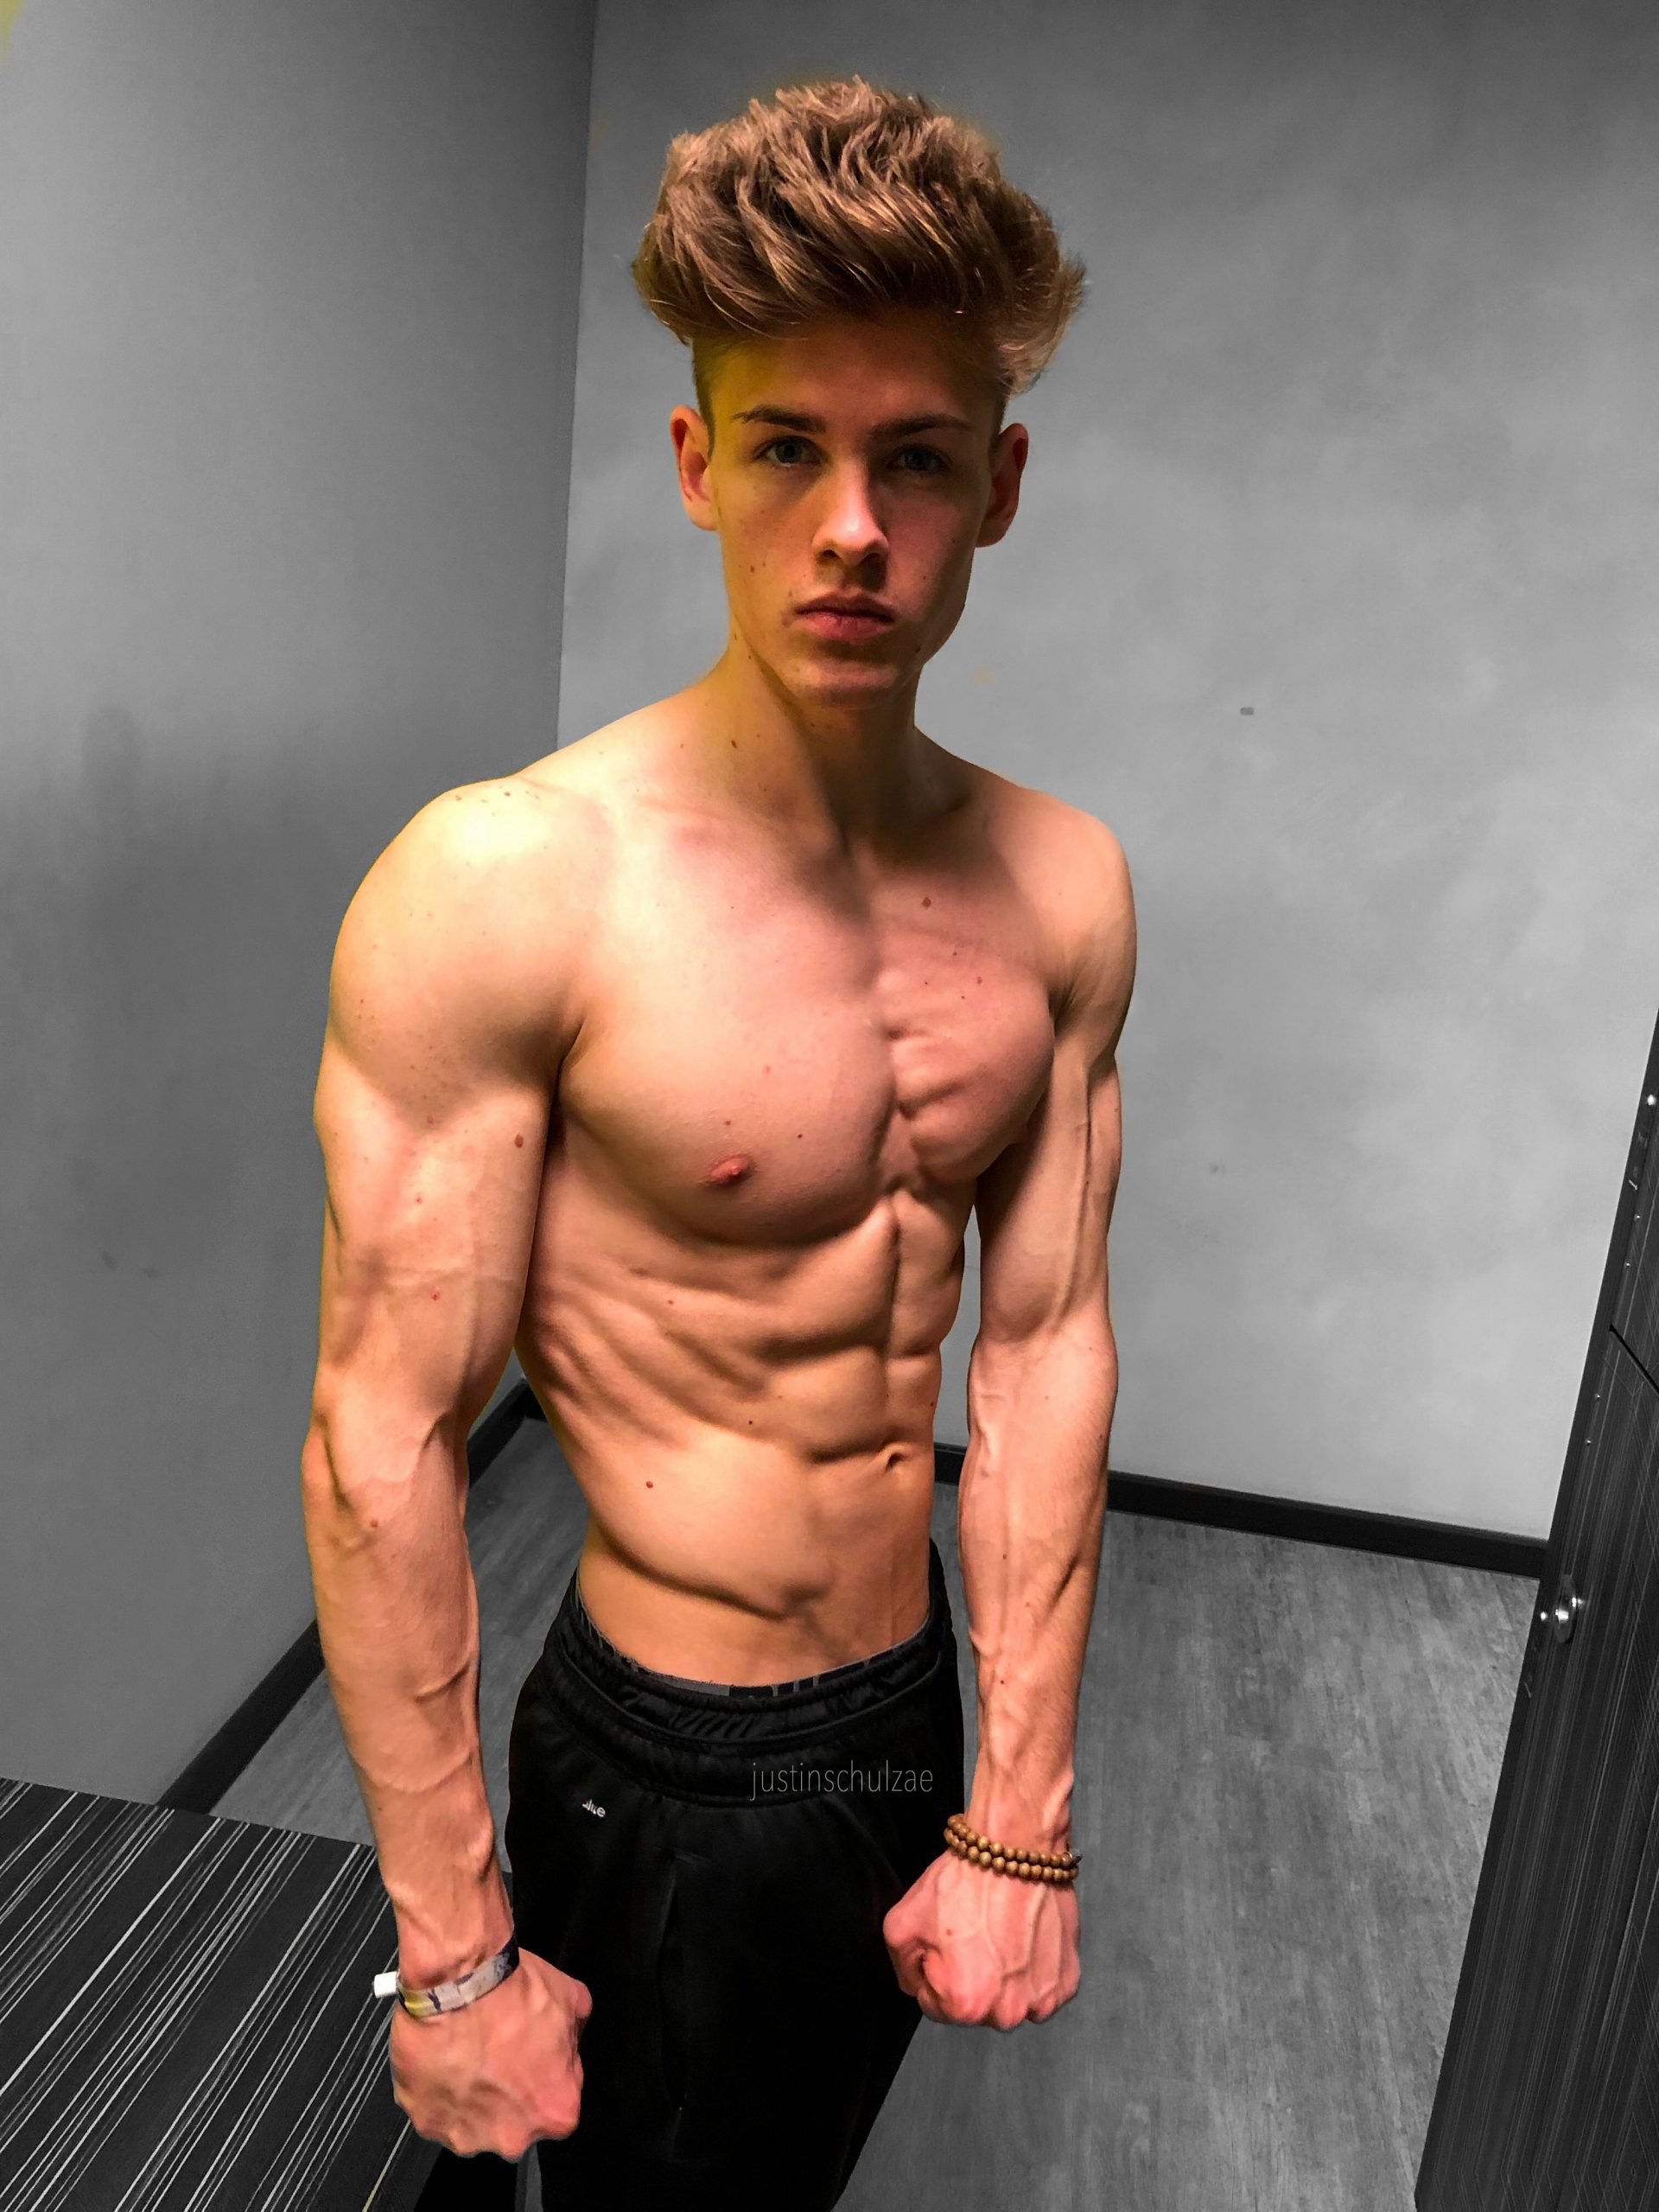 You are currently viewing lucashall Onlyfans Model from ☁️